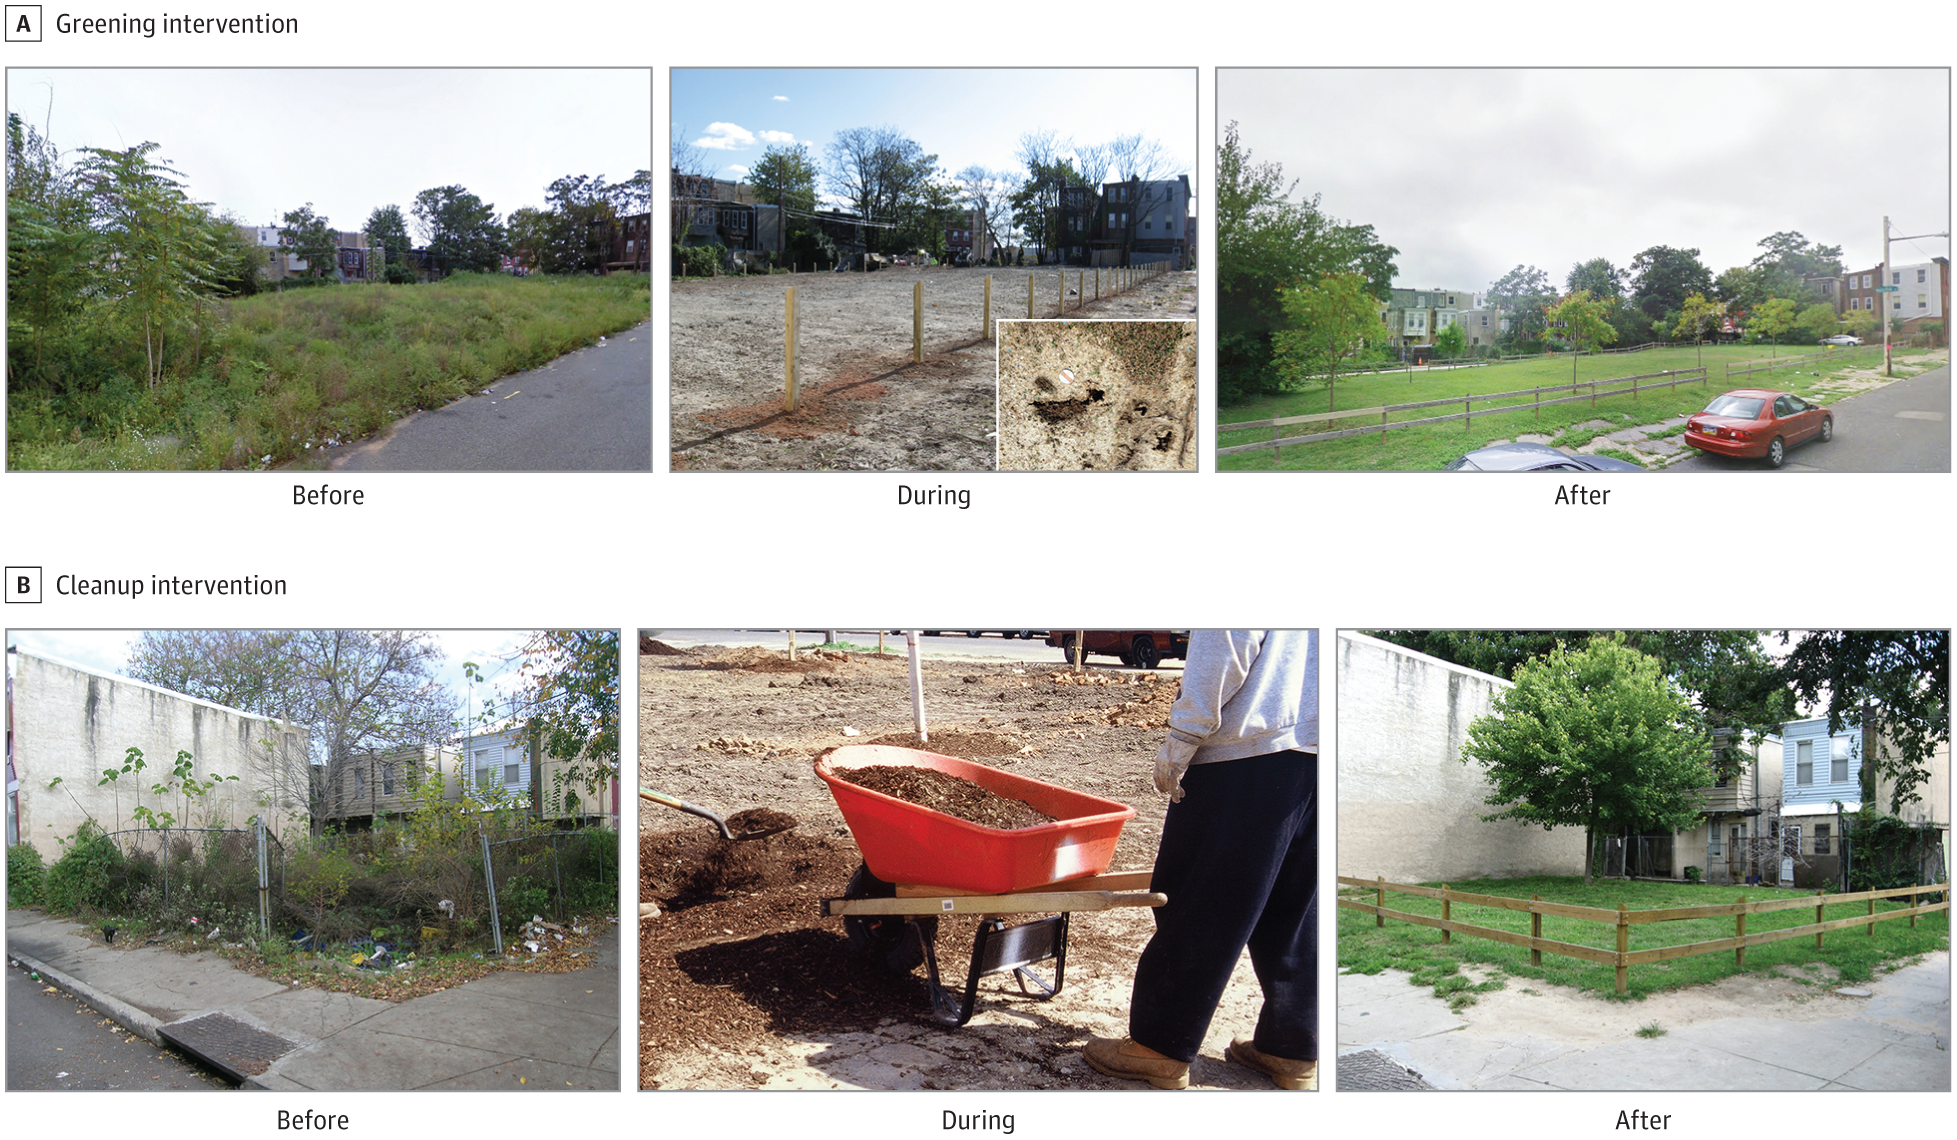 Images show blighted pre-period conditions and remediated post-period restorations.